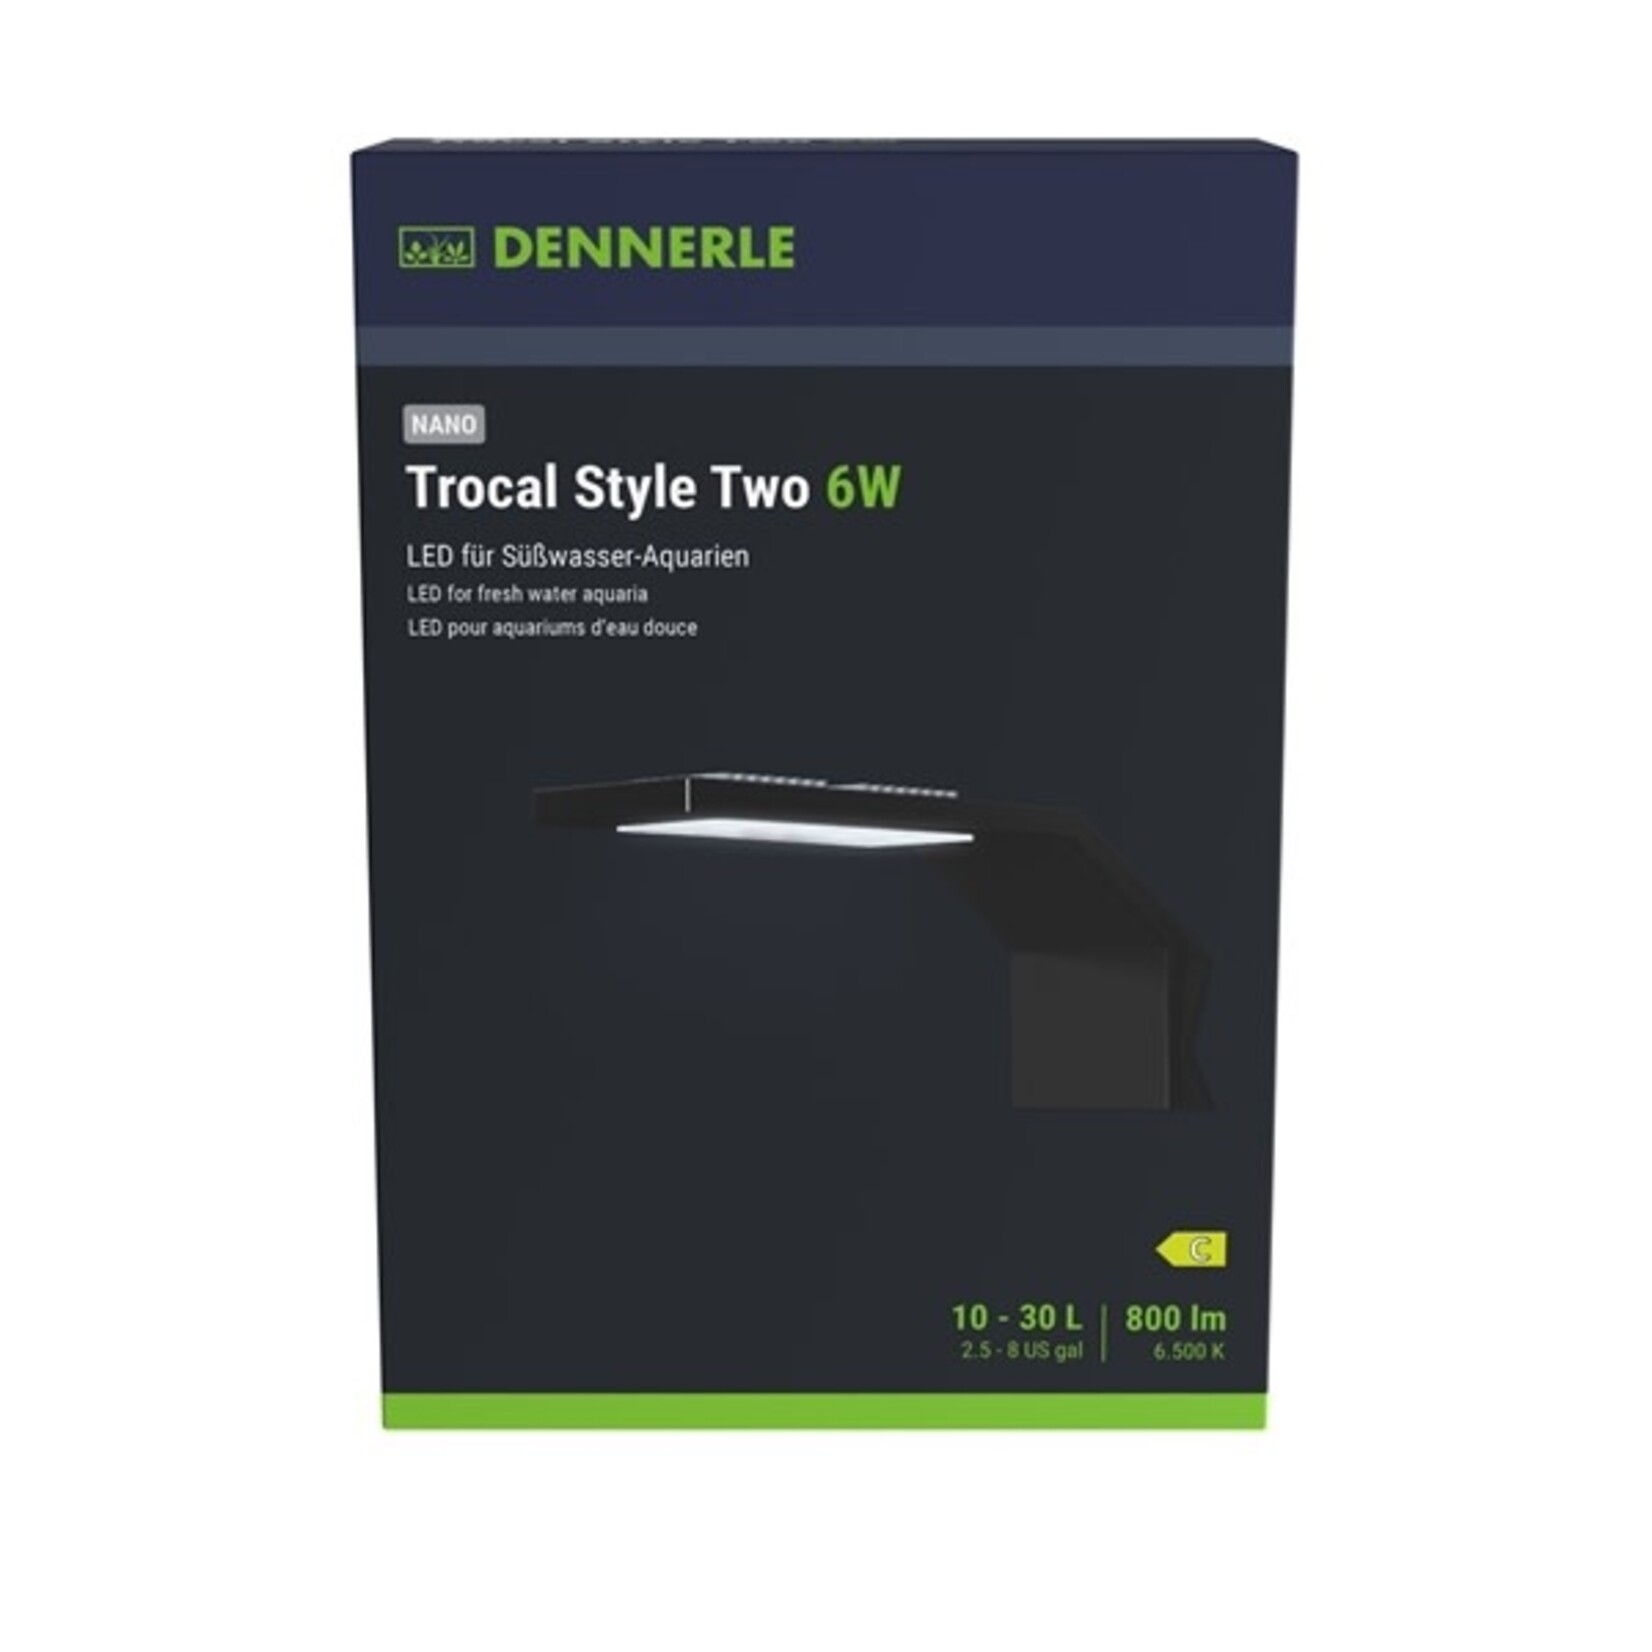 Dennerle Trocal style two 6w LED